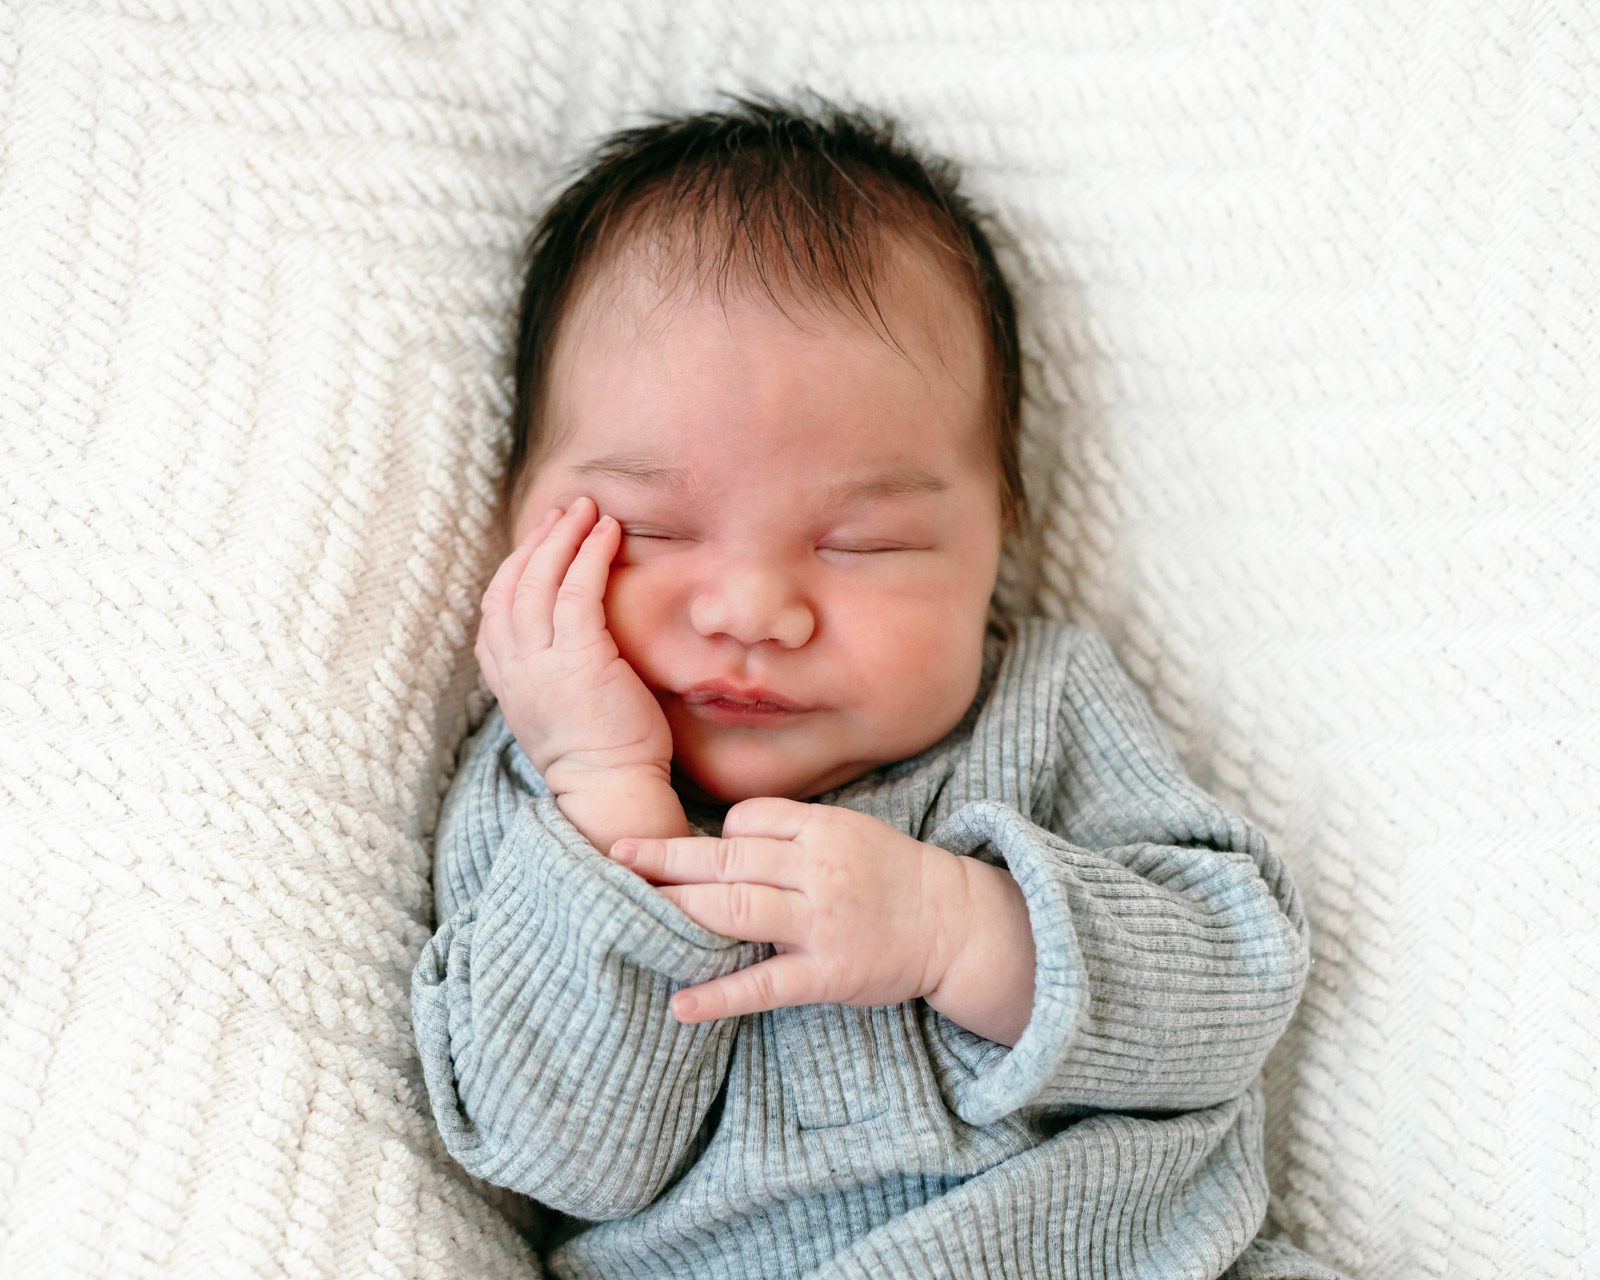 a baby boy holding hand hand against his cheek during a newborn photoshoot